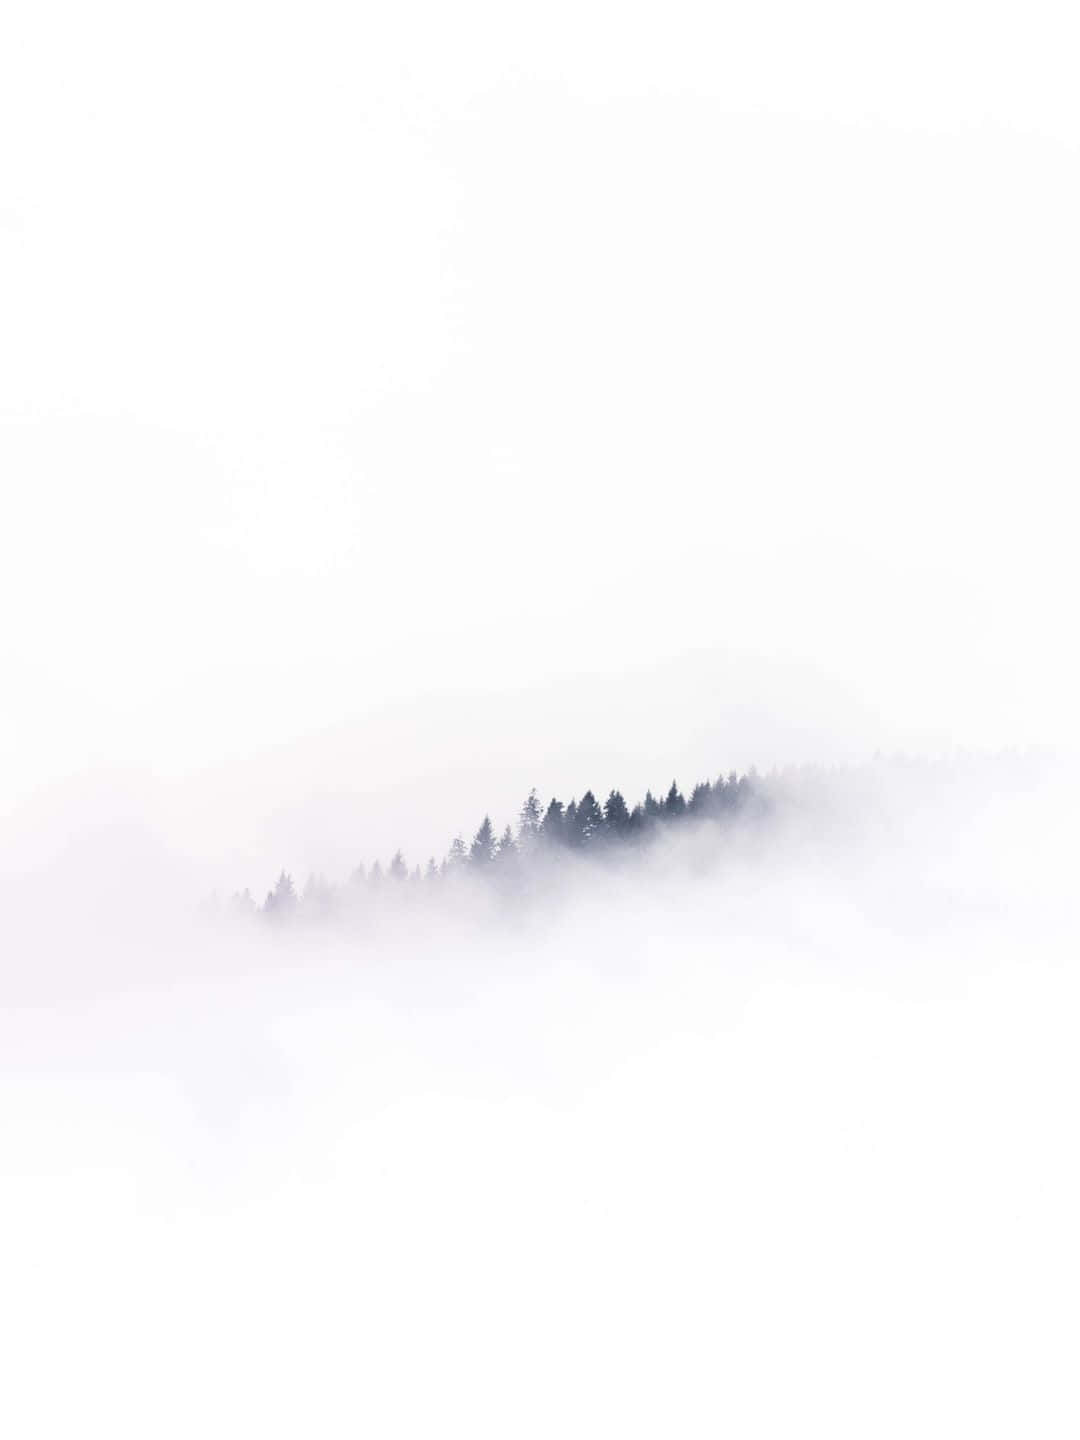 A White Background With A Fog Covering The Trees